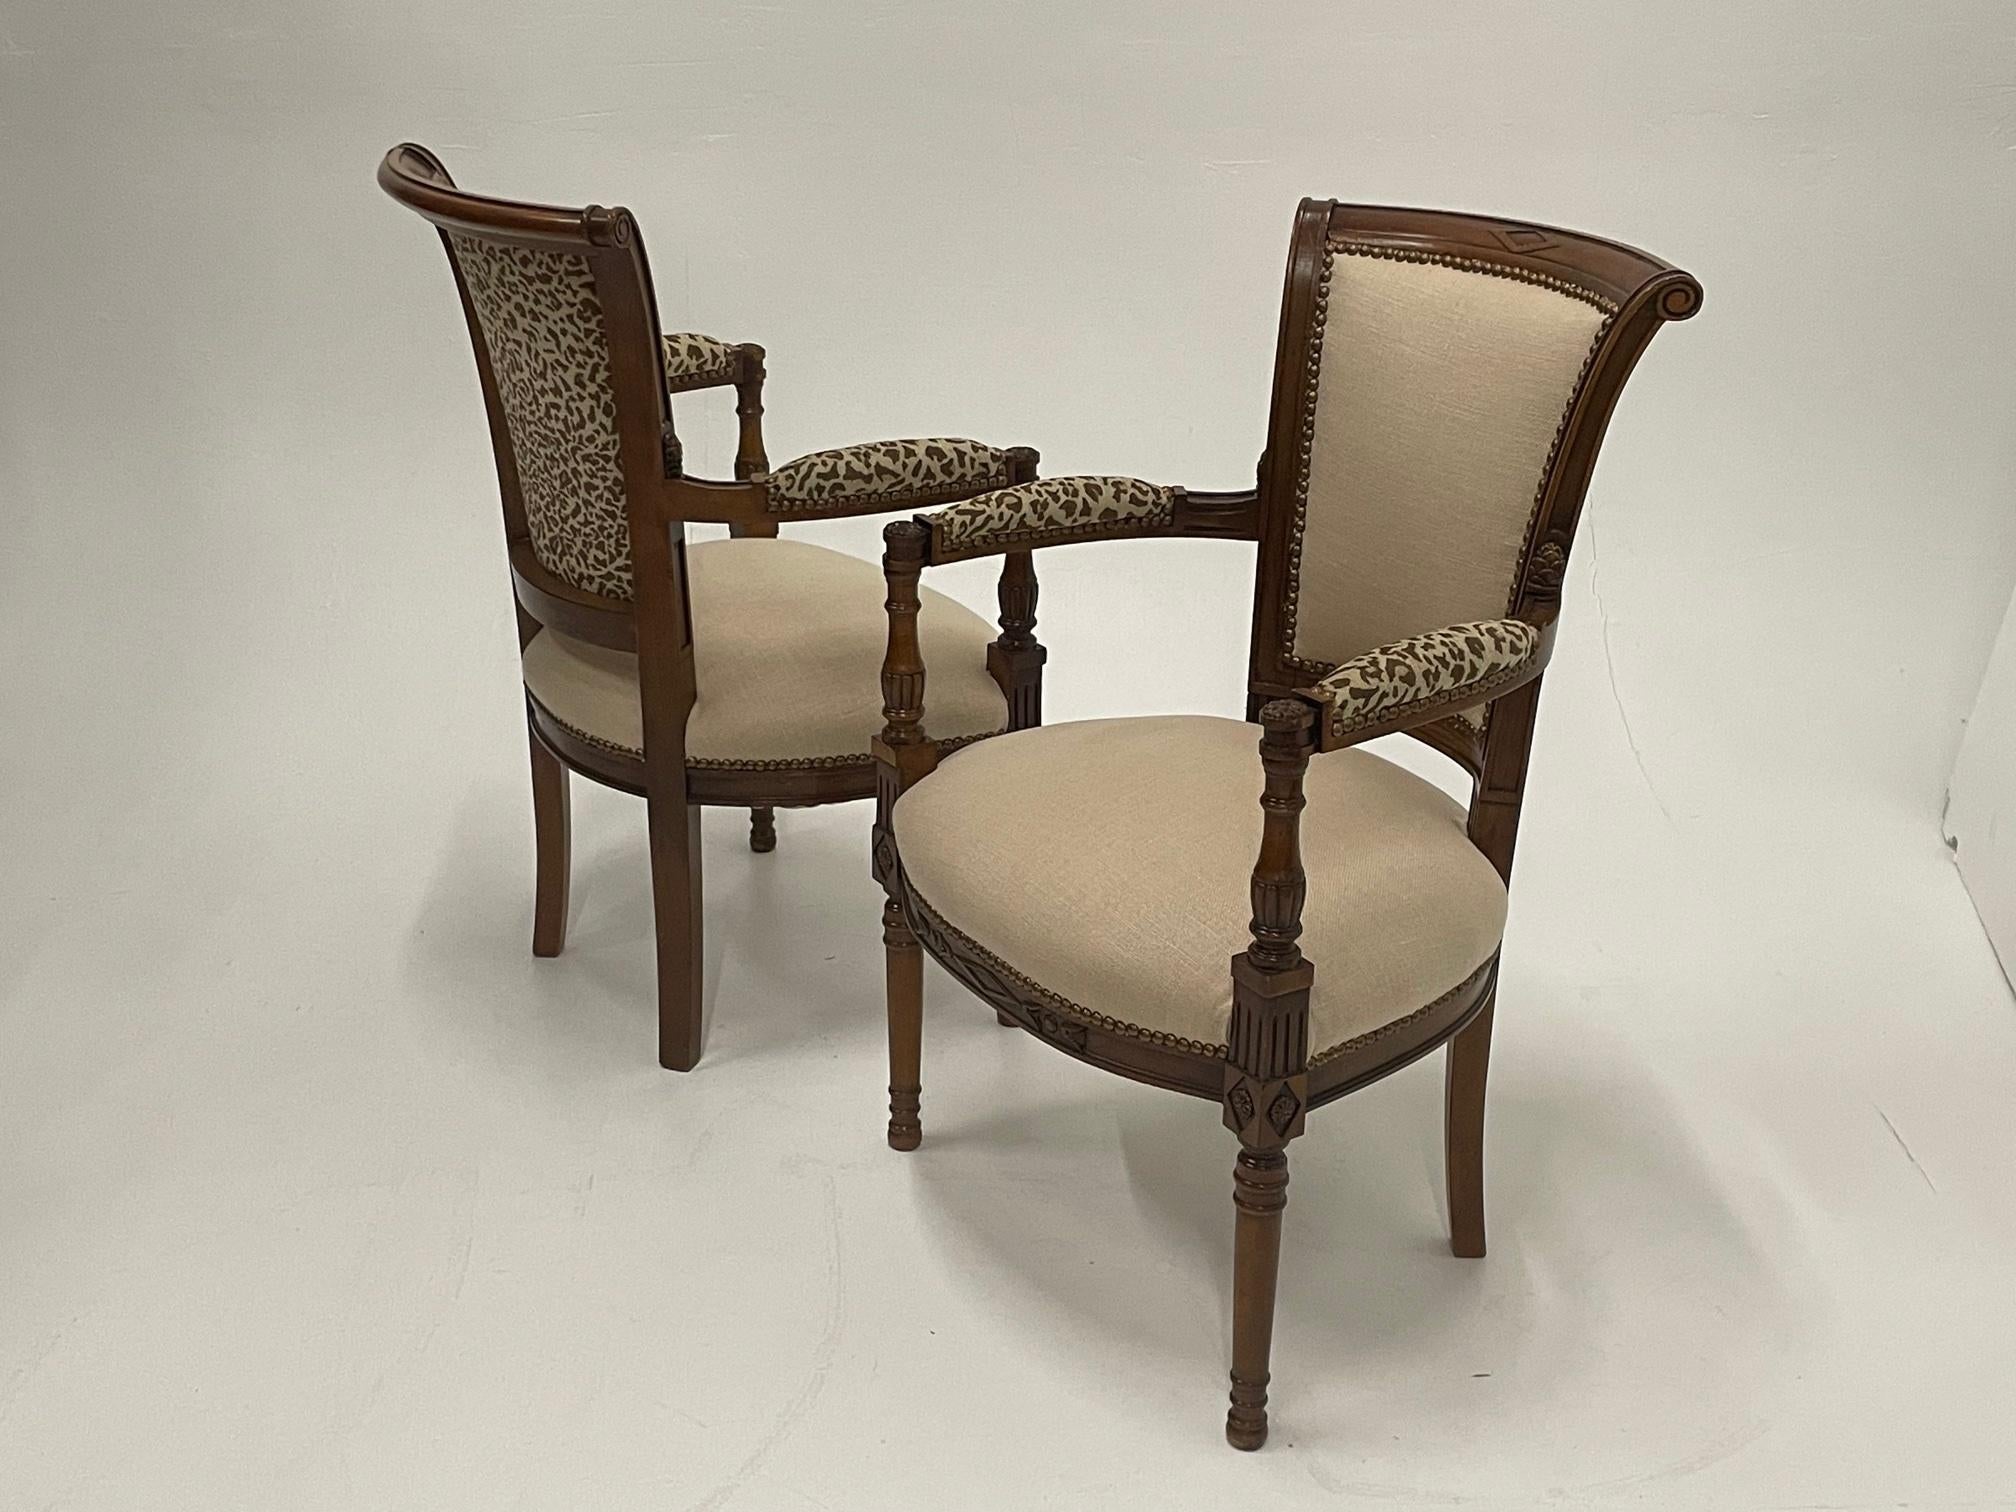 Superbly Stylish Pair of Carved Walnut Armchairs Upholstered in Linen & Leopard For Sale 3